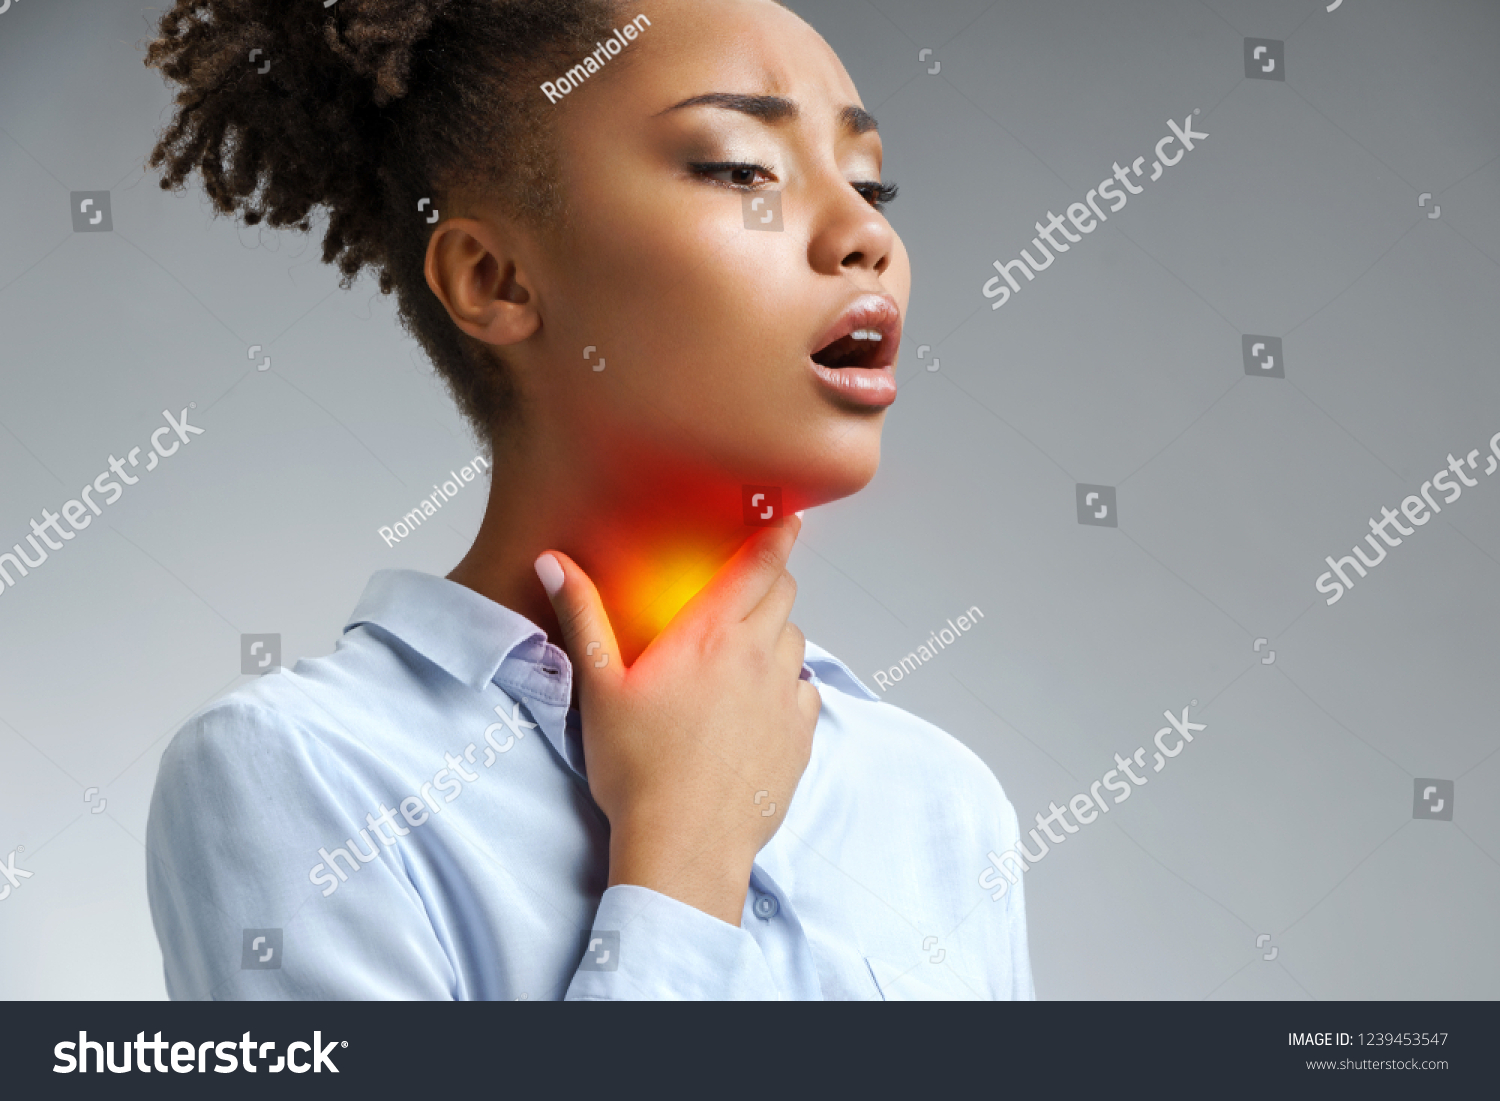 Throat pain. Woman holding her inflamed throat. Photo of african american woman in blue shirt on gray background. Medical concept #1239453547